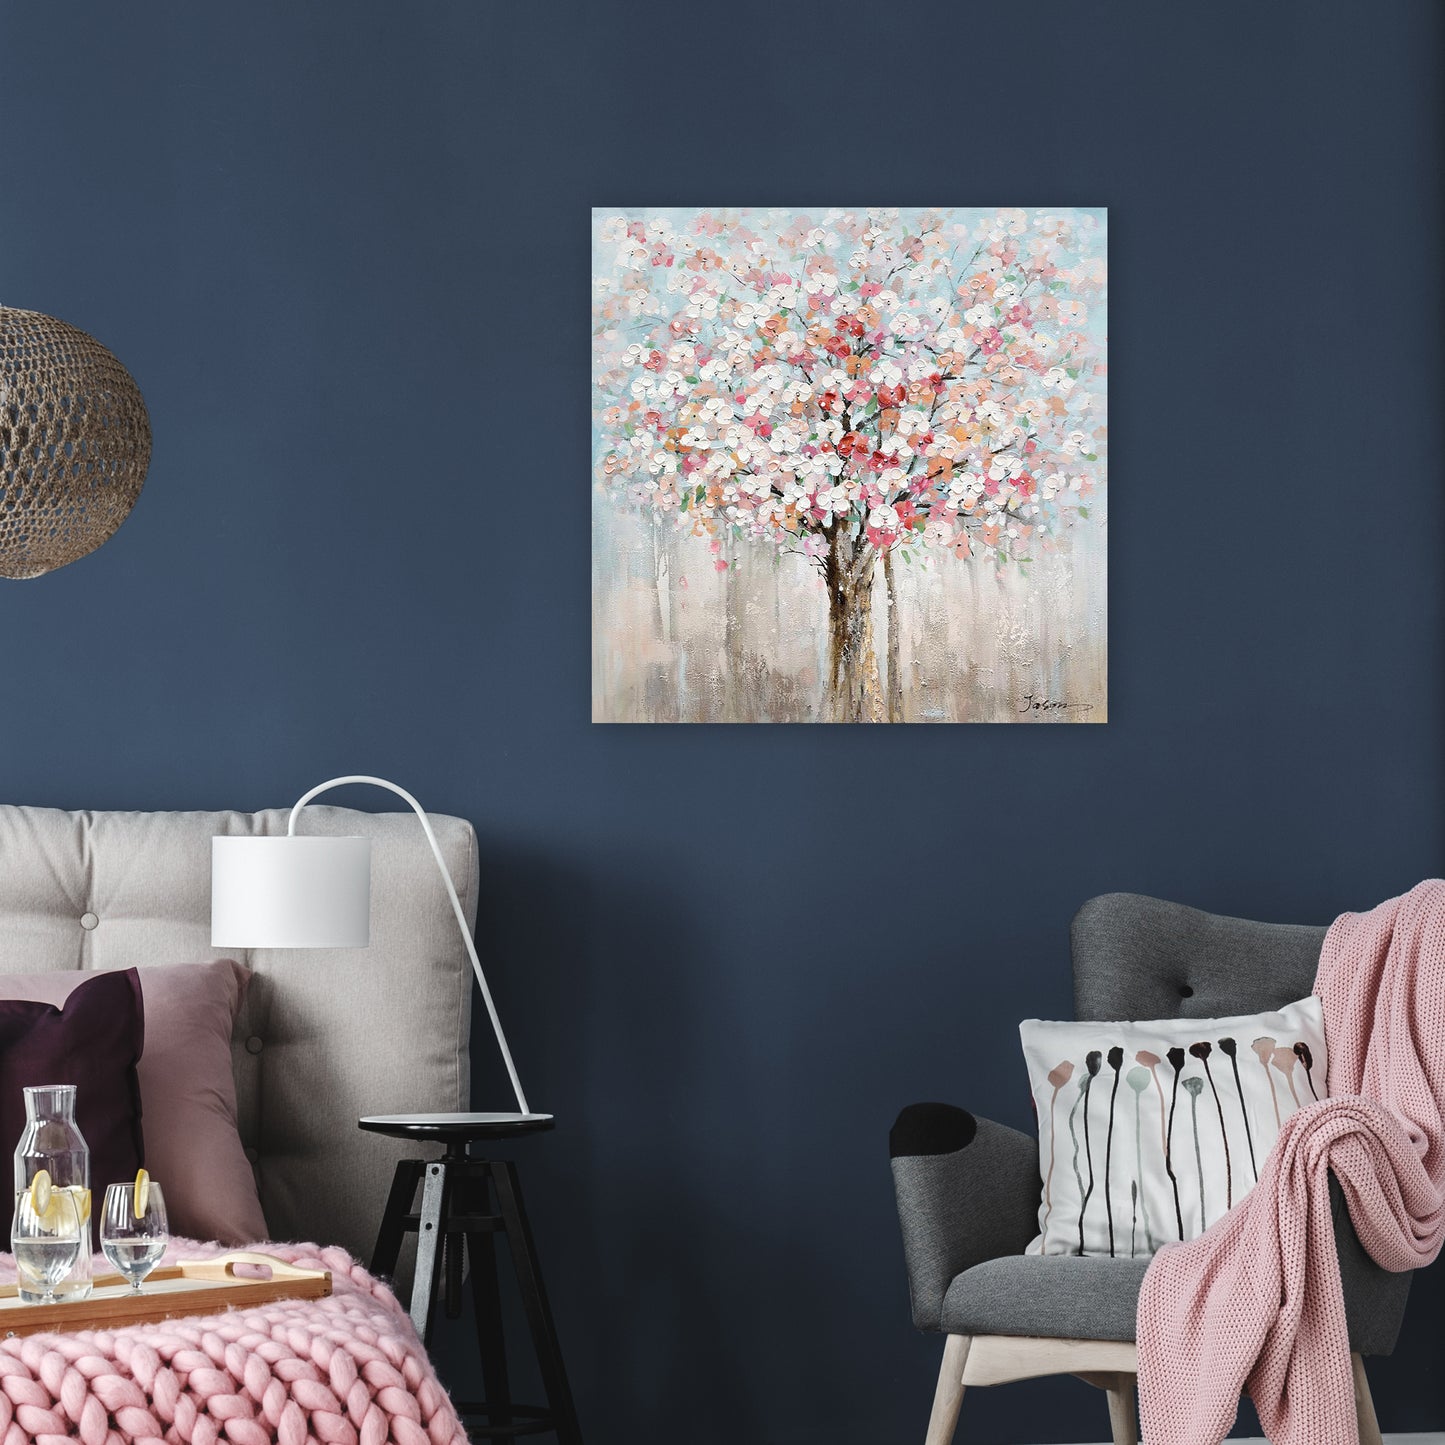 Hand-painted Art "Romantic flower tree" painting on canvas original, Wall art for living room, bedroom, office - Wrapped Canvas Painting